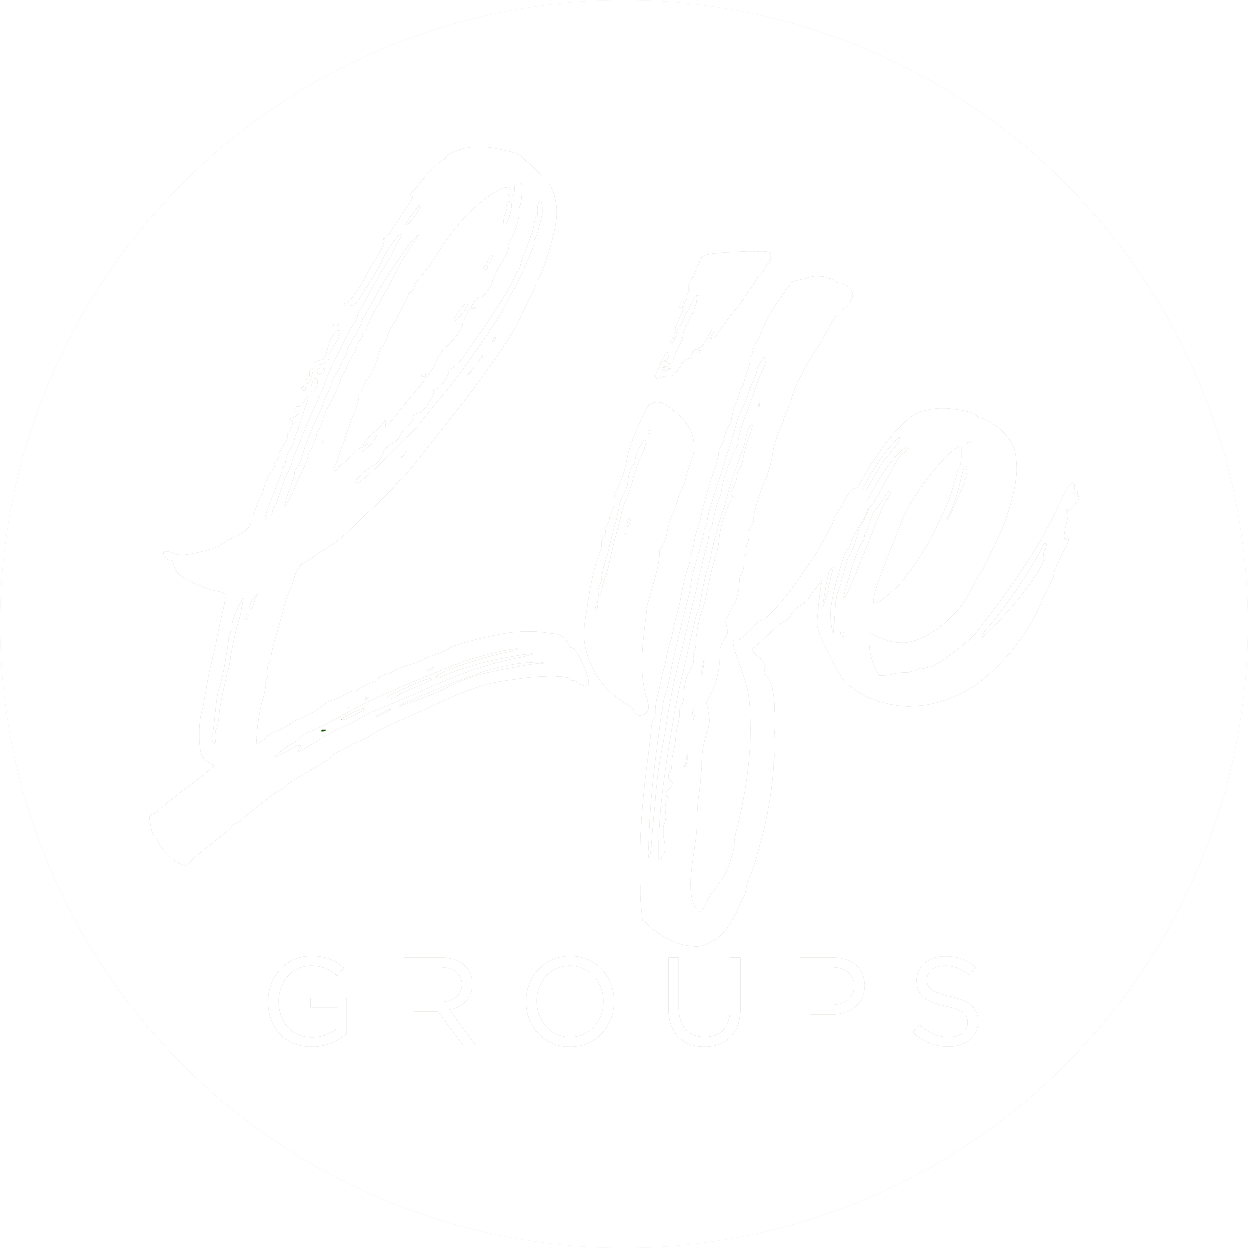 Our Life Groups